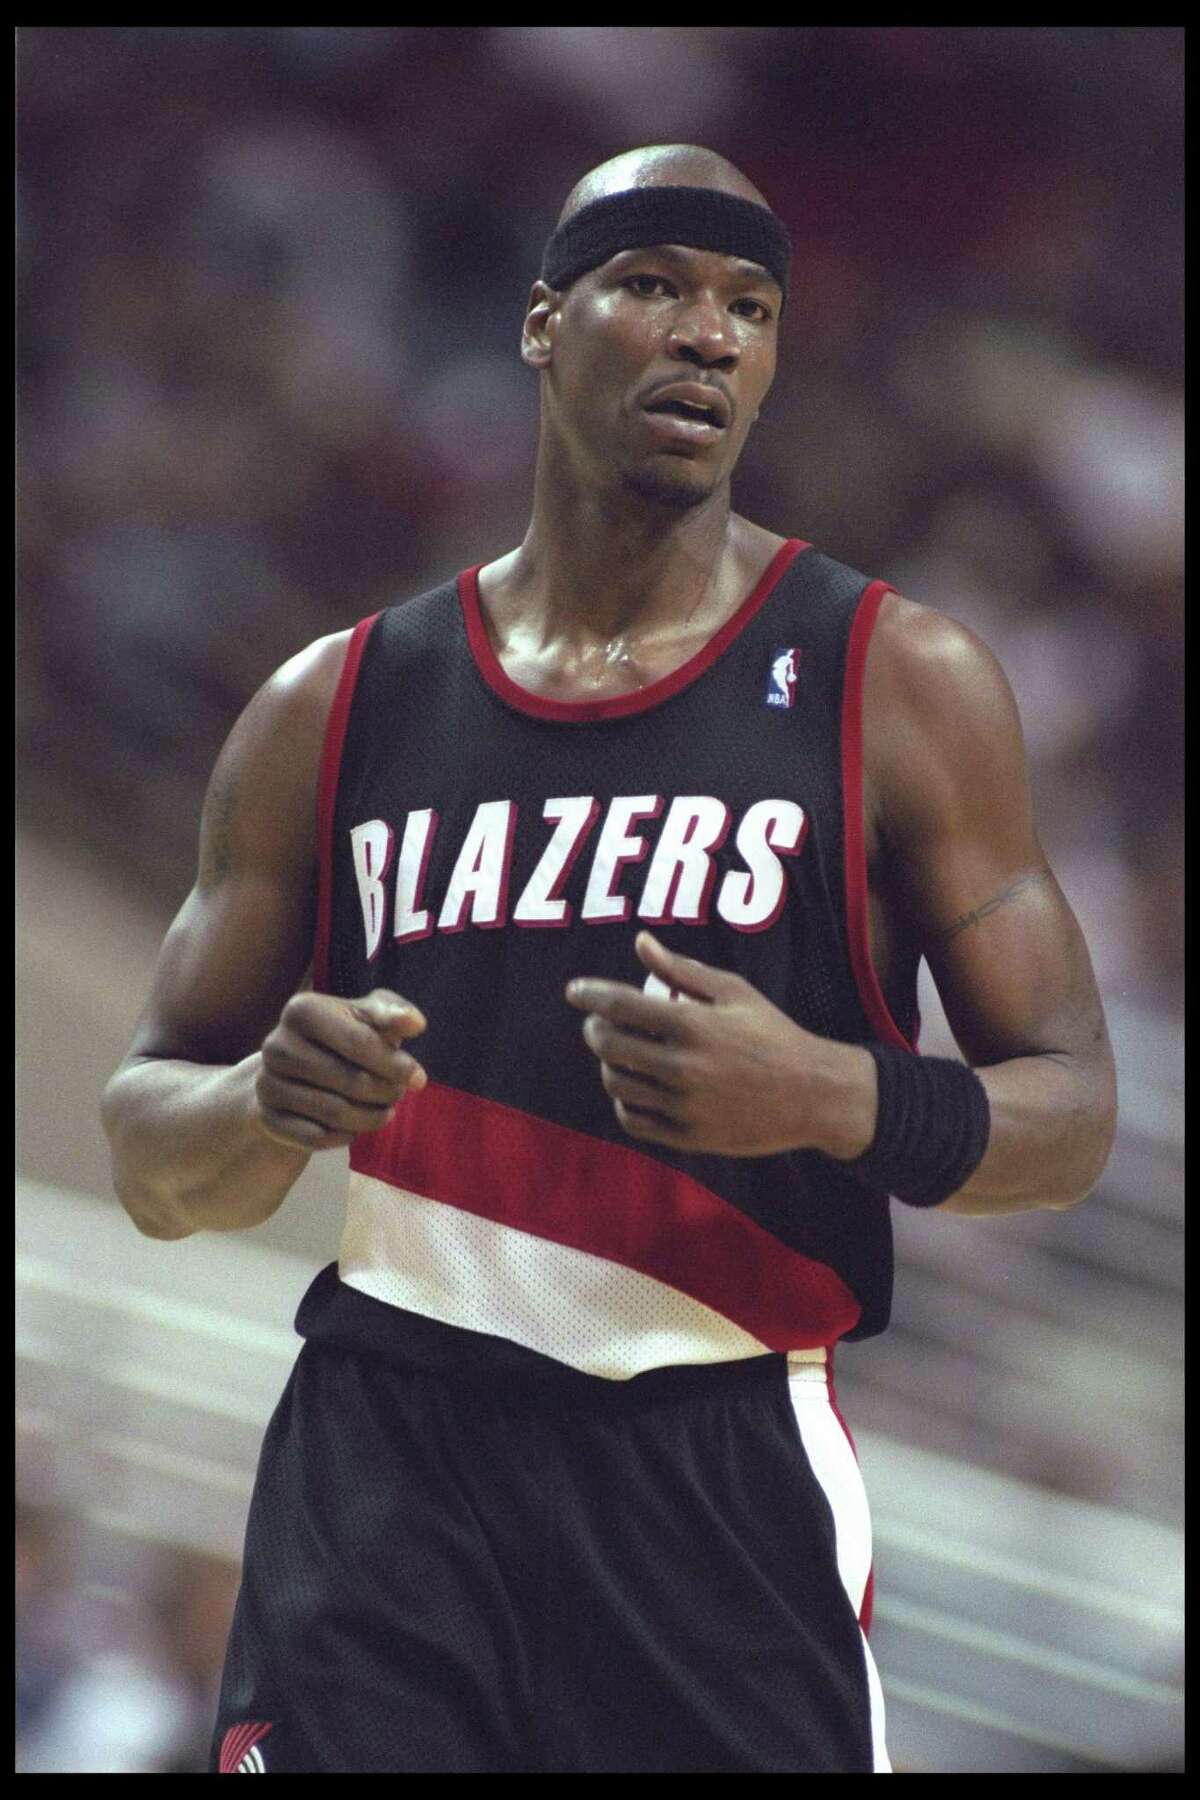 FILE - AUGUST 29: Former NBA All-Star Clifford Robinson, who played for the Portland Trail Blazers, Phoenix Suns, Detroit Pistons, Golden State Warriors and New Jersey Nets, has has passed away. He was 53 years old. 2 Mar 1996: Forward Clifford Robinson of the Portland Trail Blazers looks on during a game against the Orlando Magic held at Orlando Arena in Orlando, Florida. The Magic won the game, 115-89.